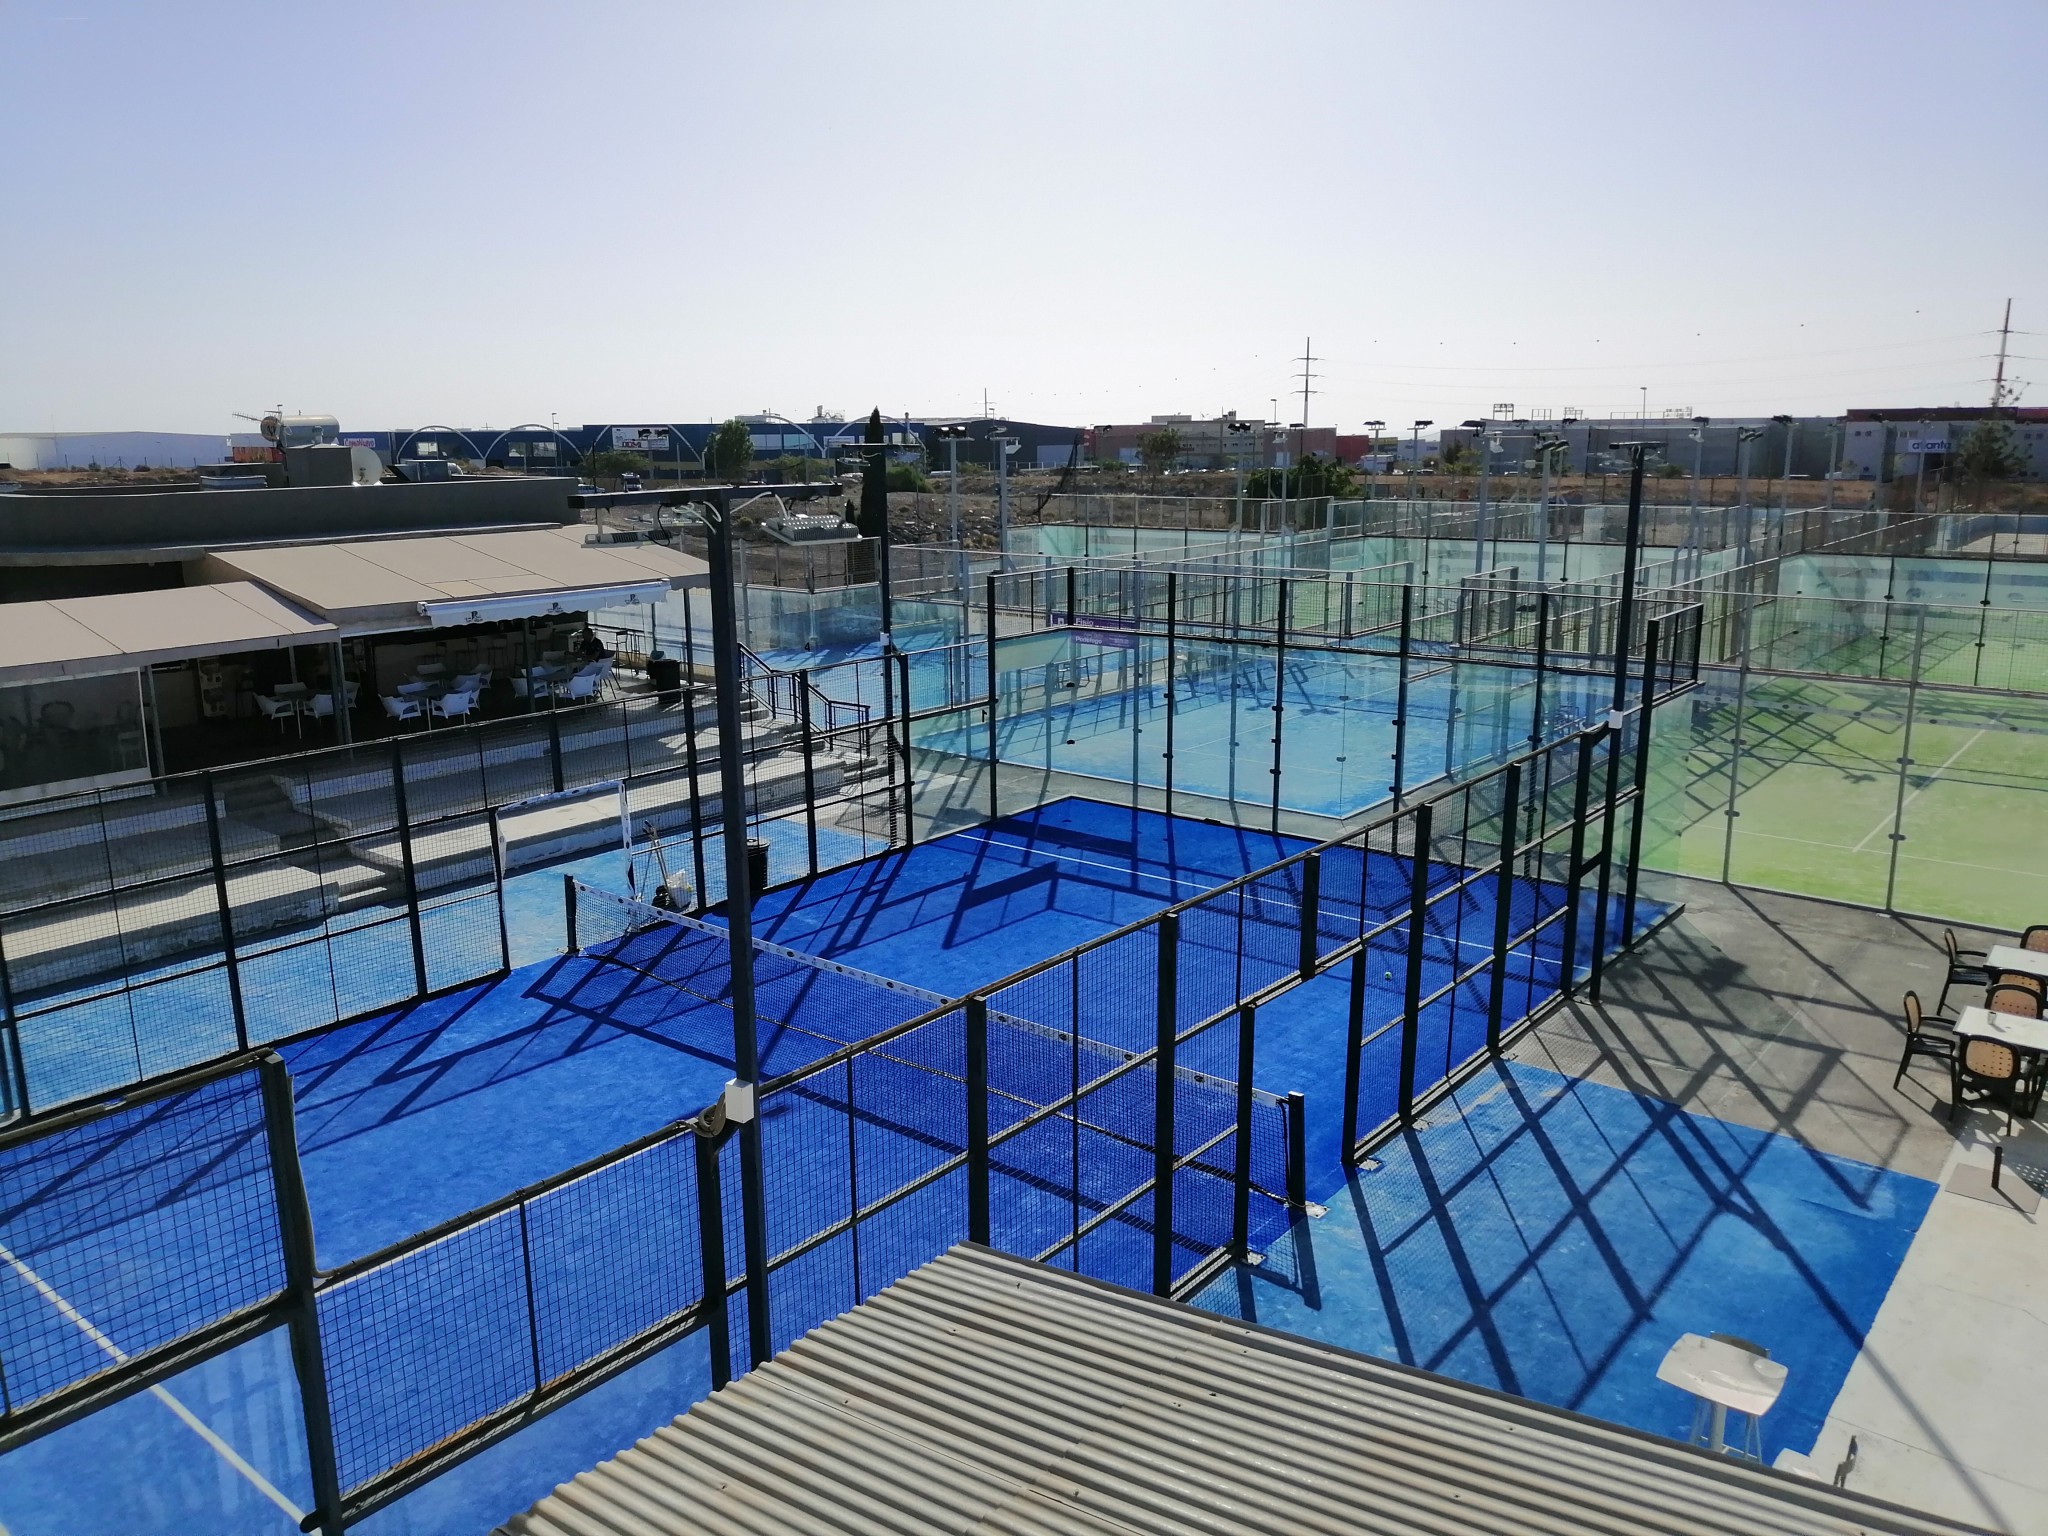 The future prospects of padel in France